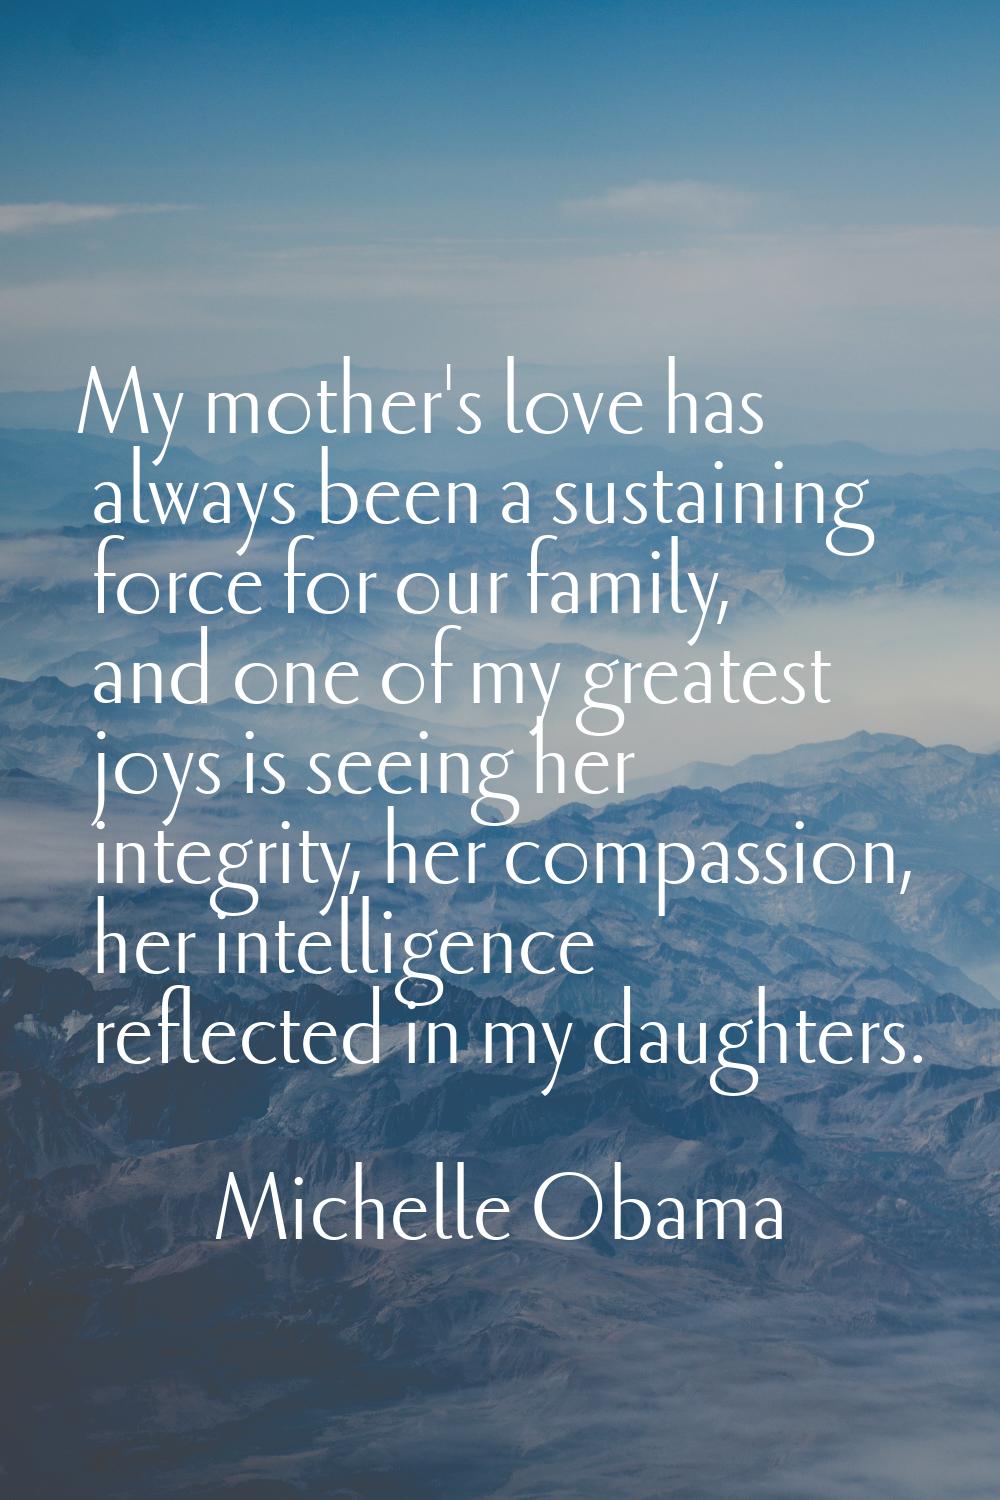 My mother's love has always been a sustaining force for our family, and one of my greatest joys is 